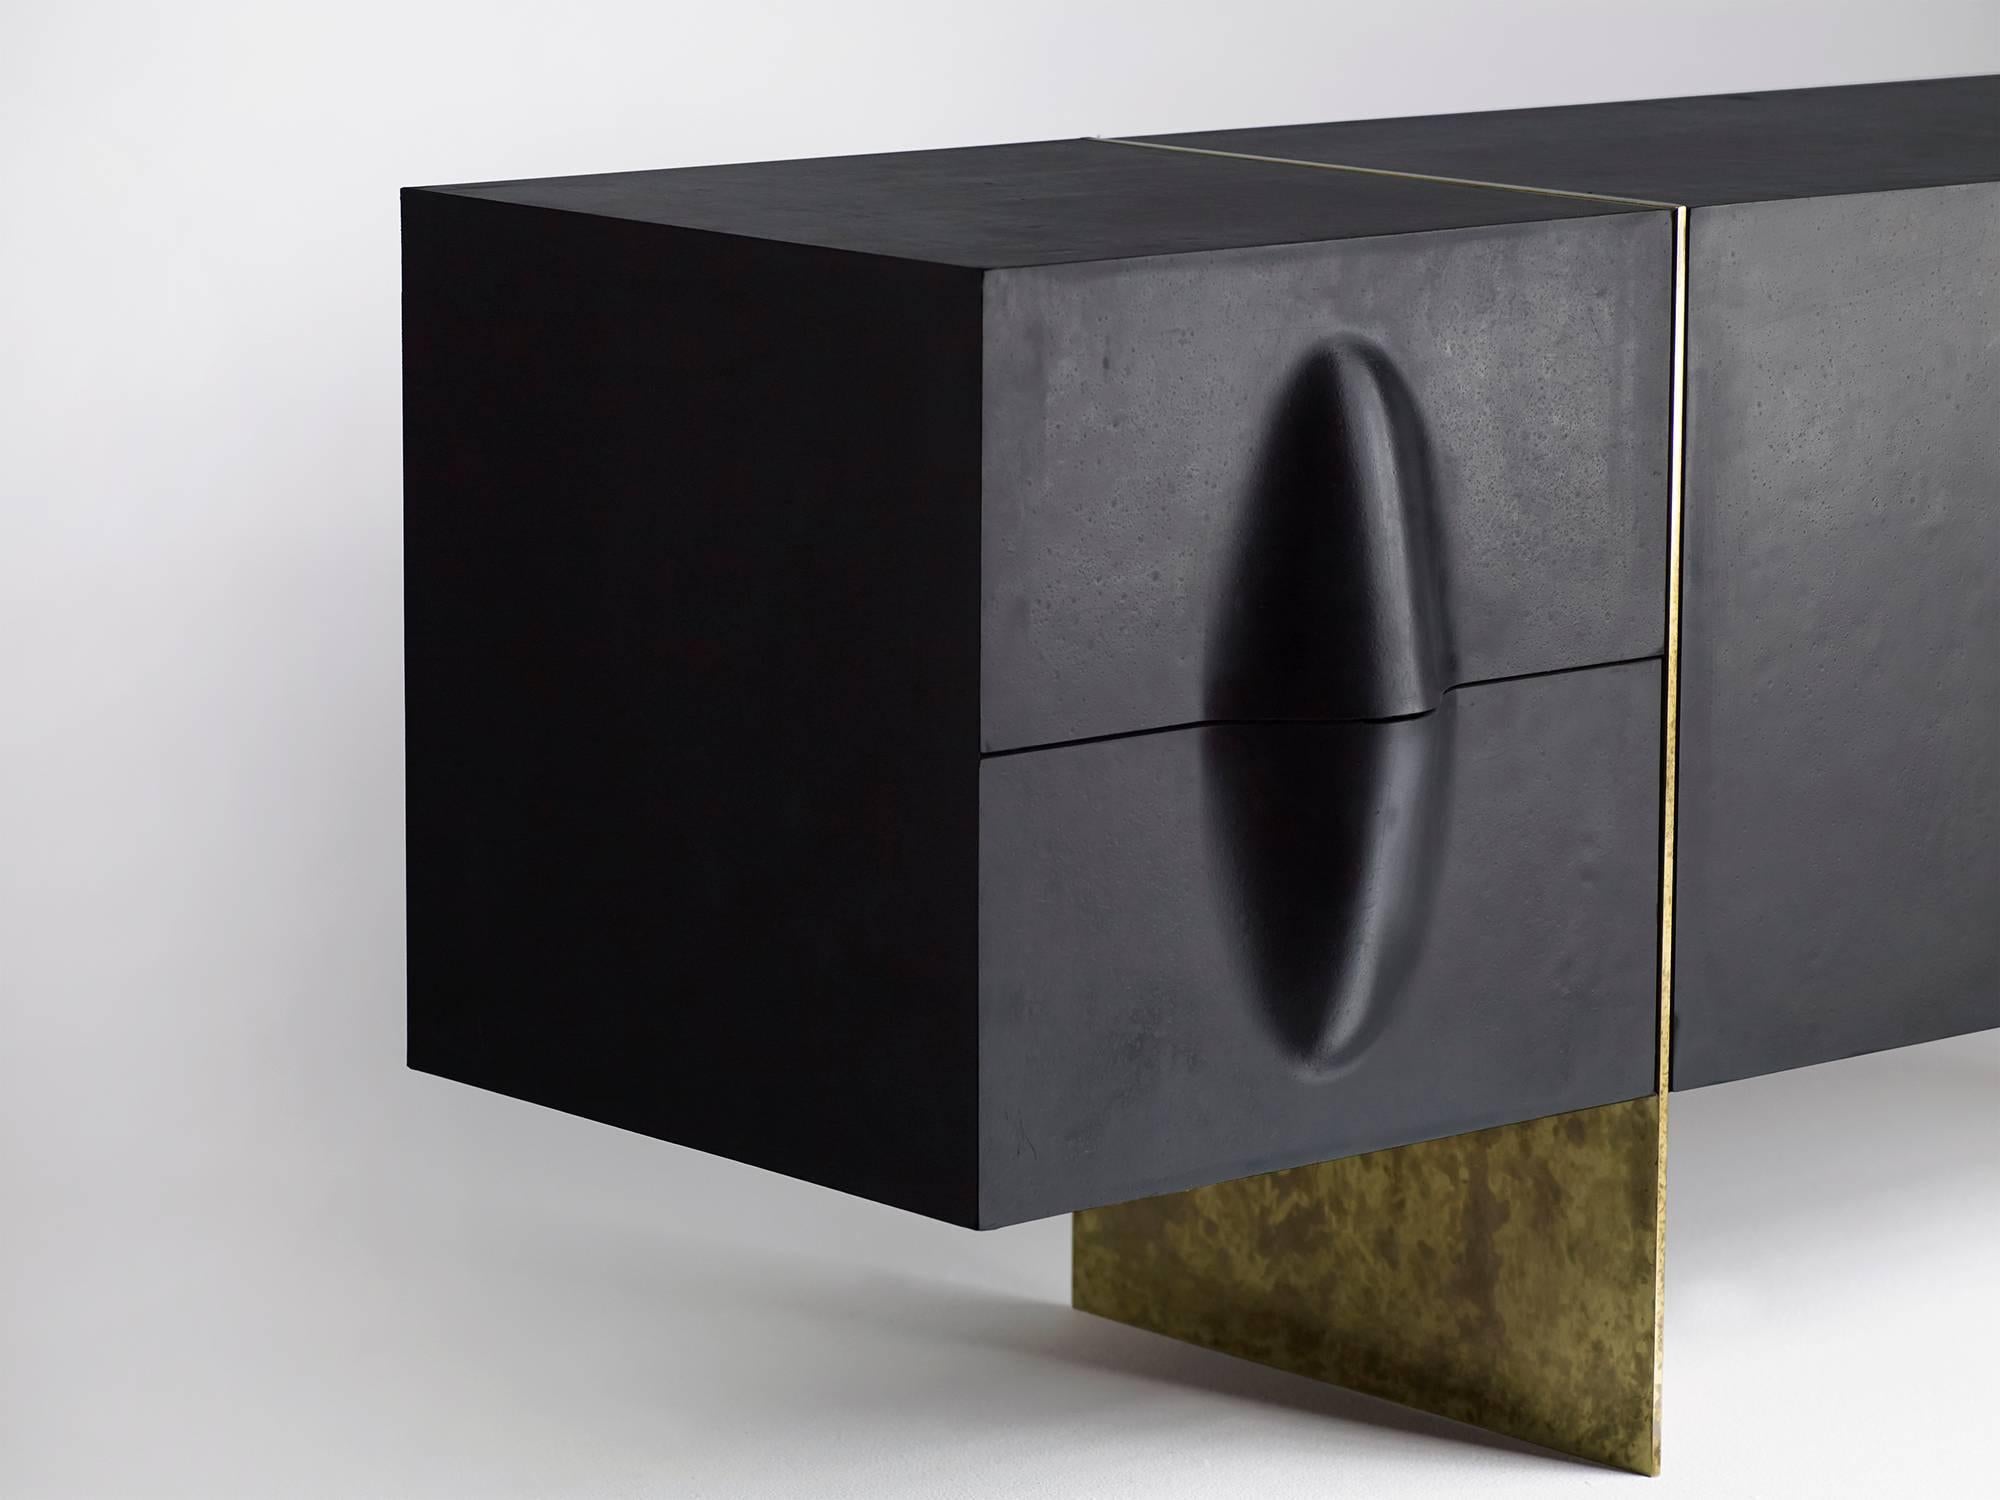 Beautiful black rubber and brass credenza with an aniline dyed wood interior by  Brian Thoreen. Made to order in Los Angeles with a lead time of 10-12 weeks. Please inquire for custom sizing. Available with either a red, green, or black interior. 

 